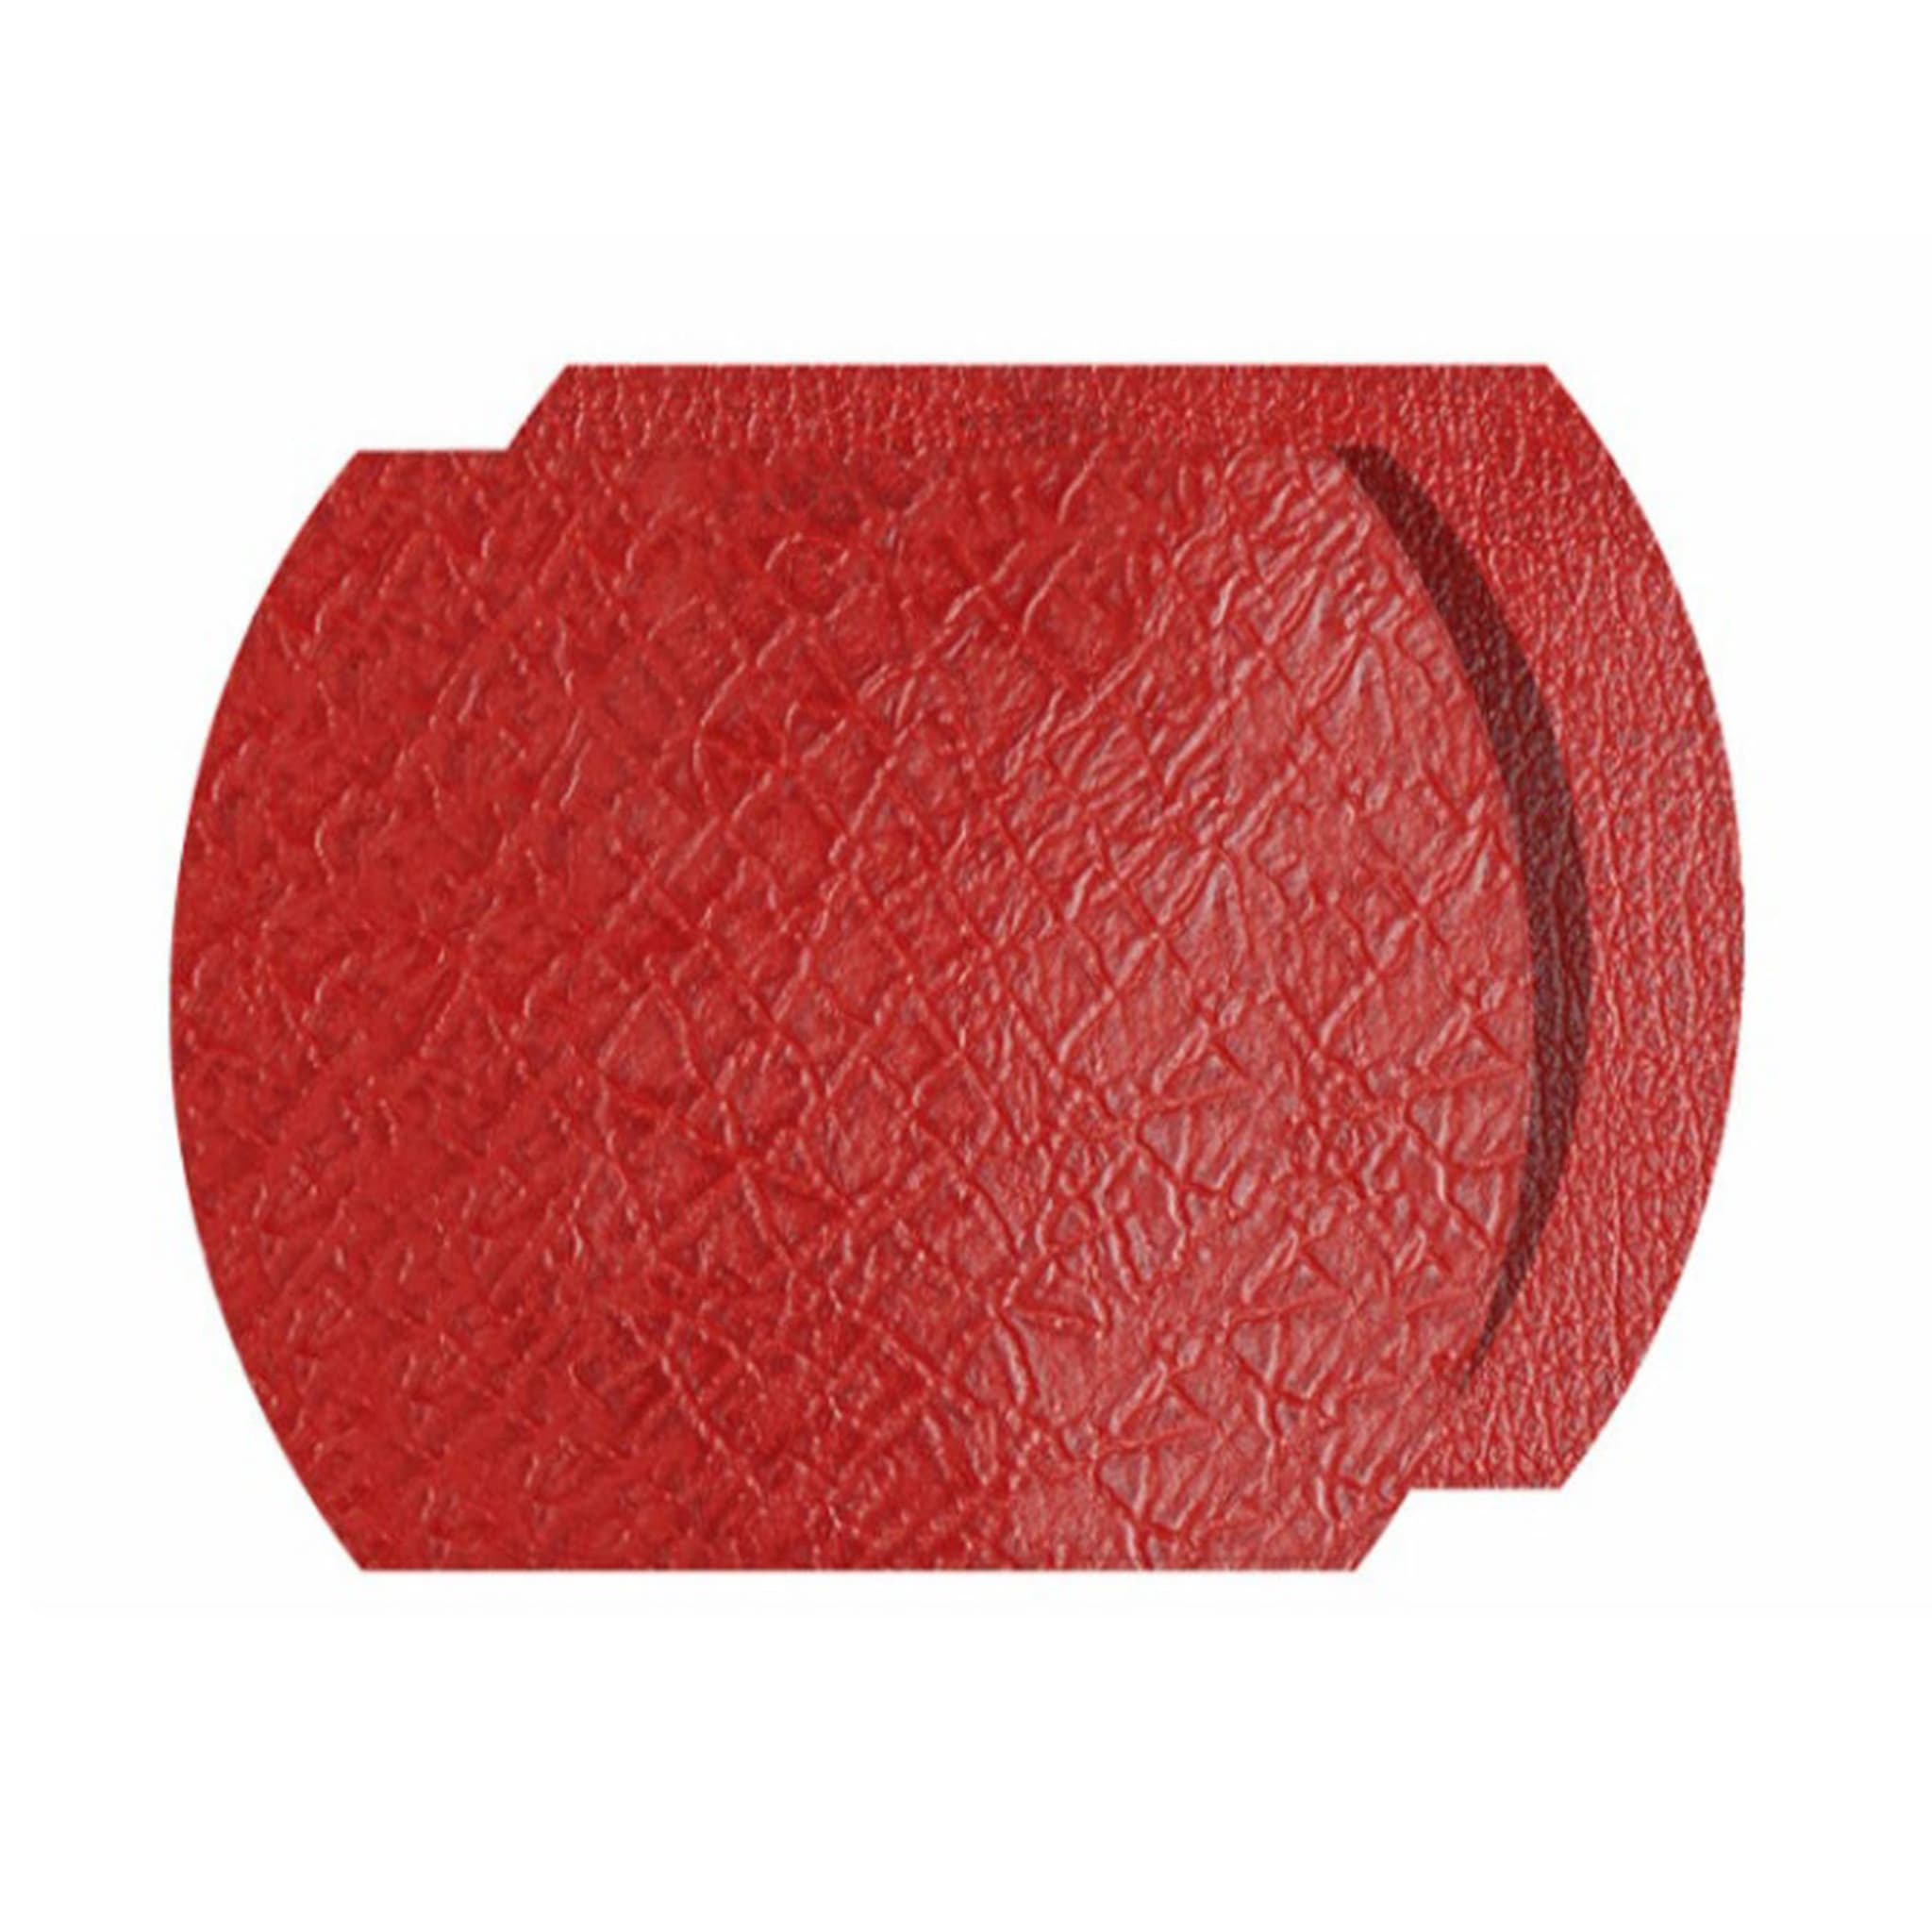 Tanzania Medium Set of 2 Red Leather Placemats - Main view